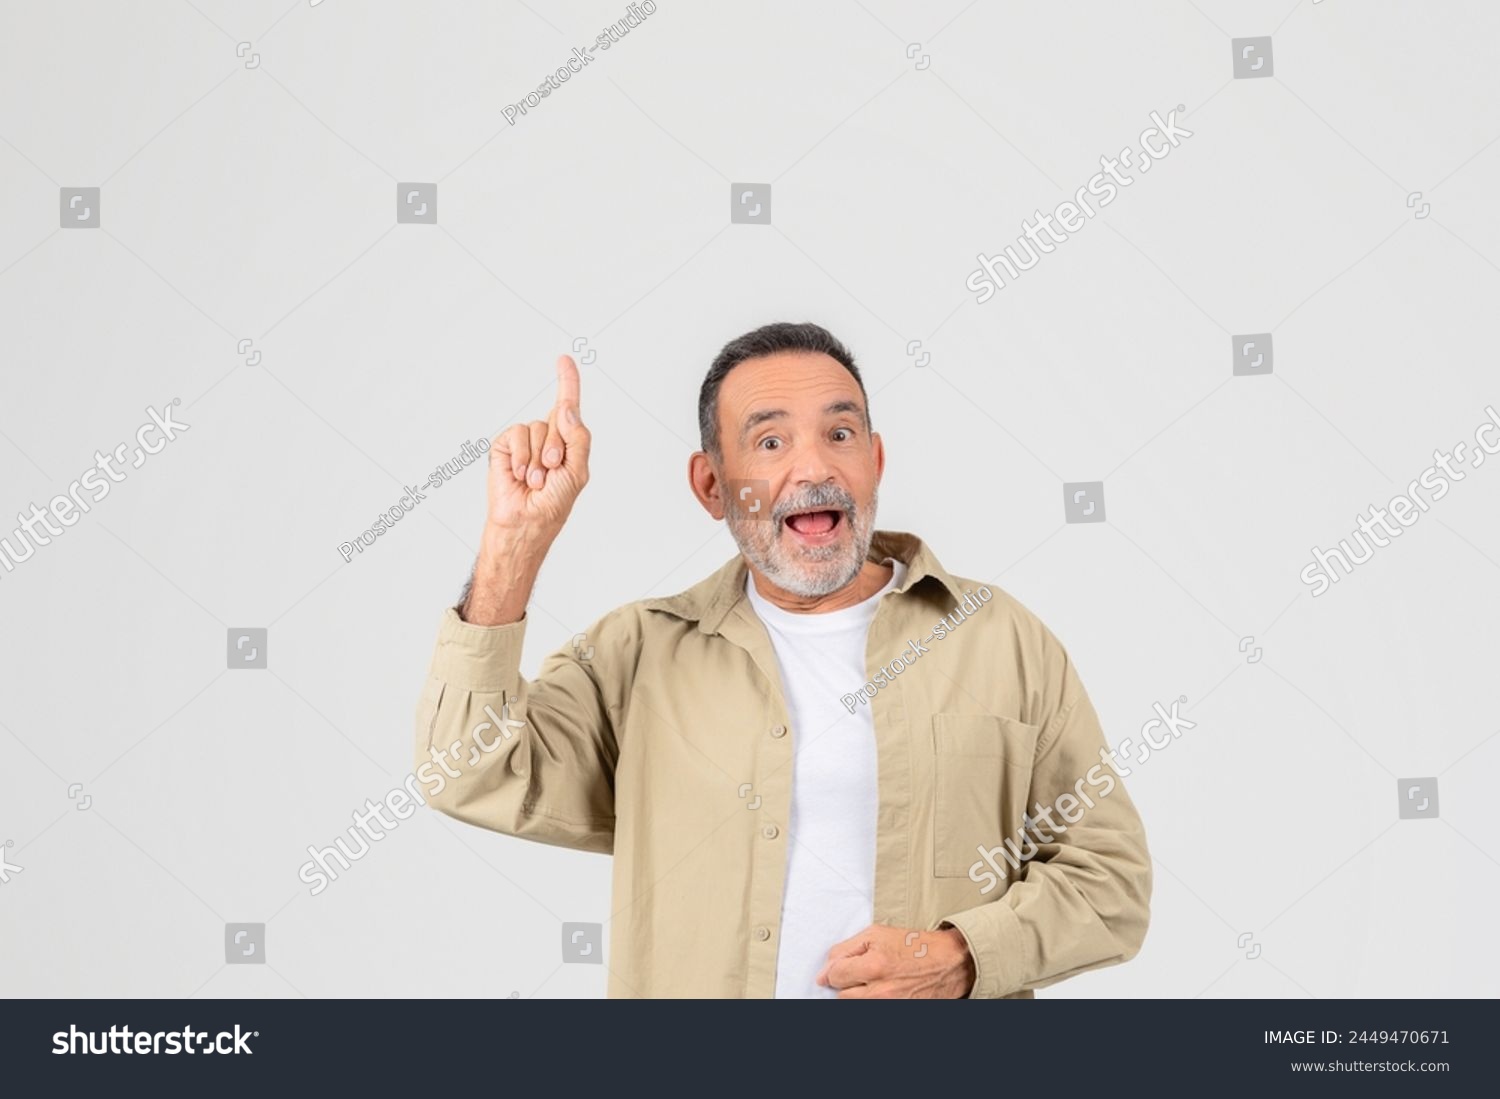 An old man shows excitement, pointing up enthusiastically, isolated on a neutral background, copy space #2449470671